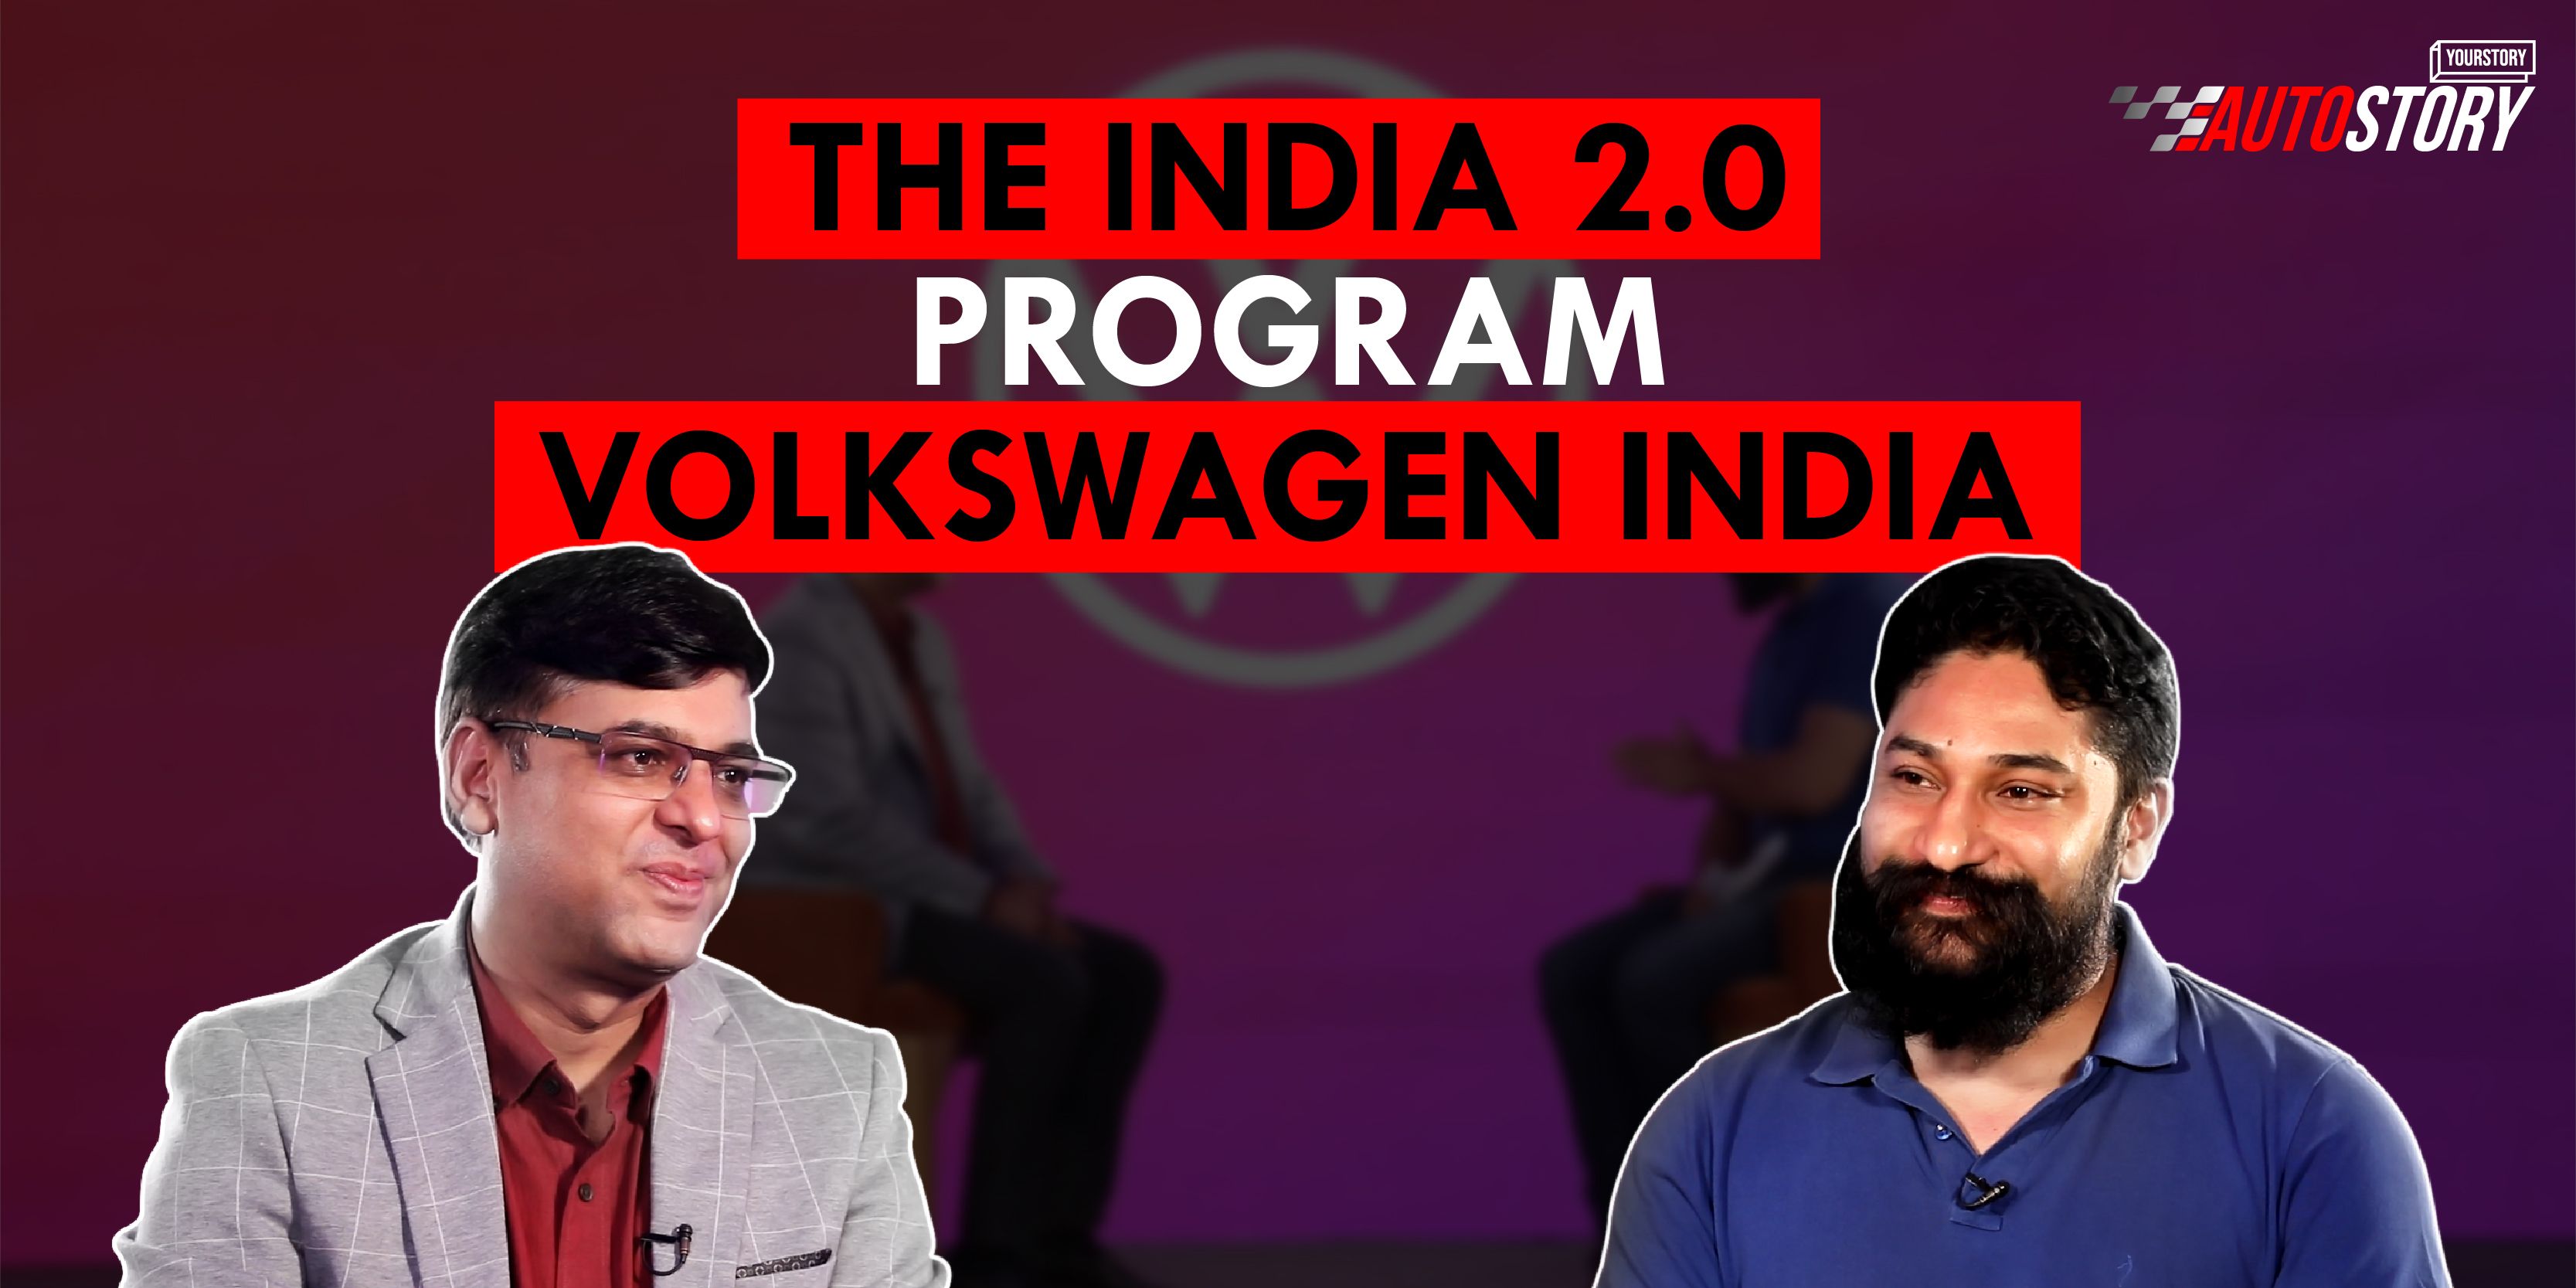 The India 2.0 Programme: A conversation with Ashish Gupta, Brand Director, Volkswagen India